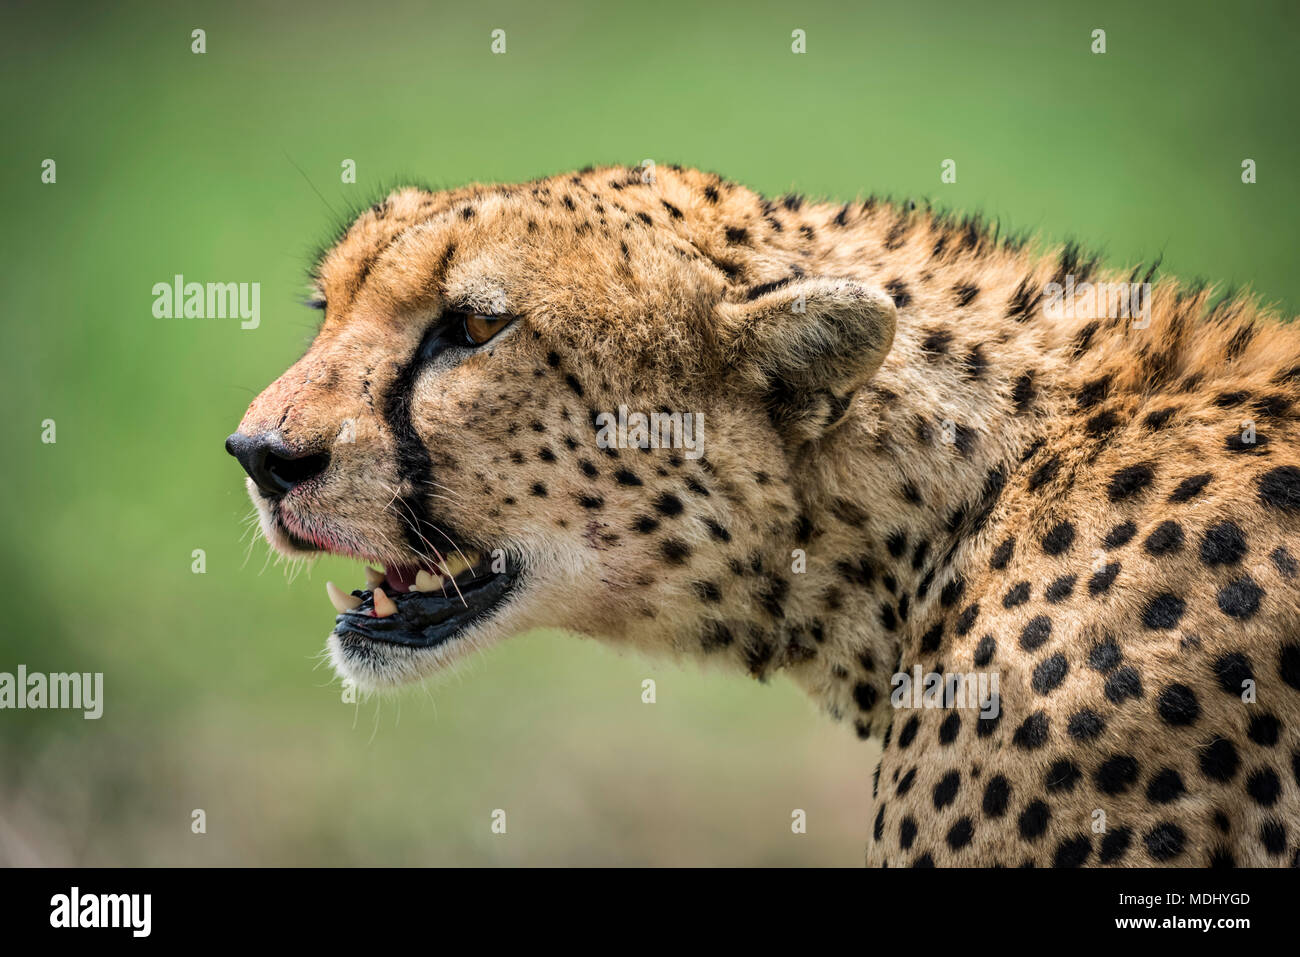 Close-up of cheetah (Acinonyx jubatus) head looking out over the grassy savannah with it's mouth open. It has golden fur covered with black spots, ... Stock Photo